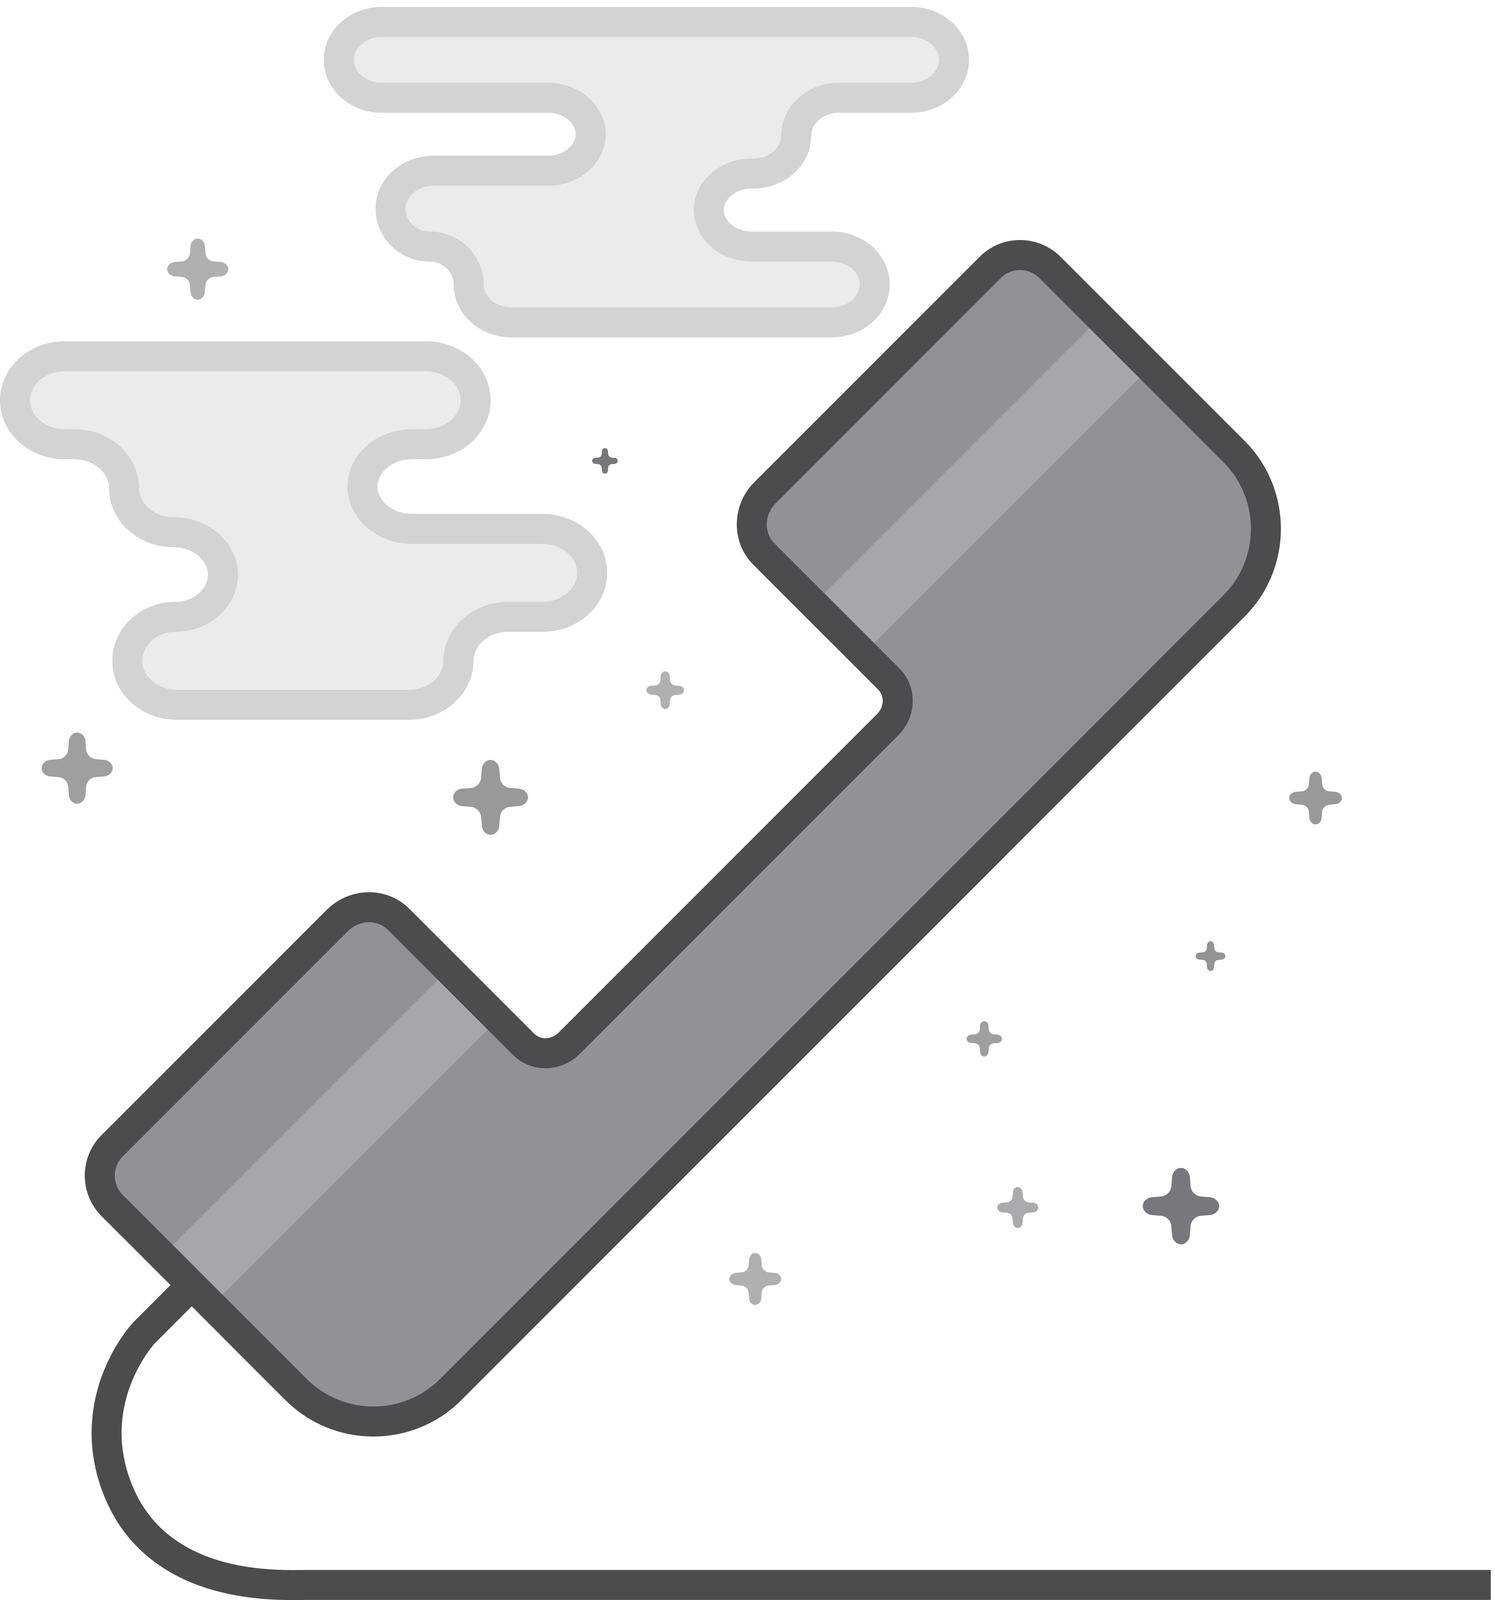 Landline telephone icon in flat outlined grayscale style. Vector illustration.